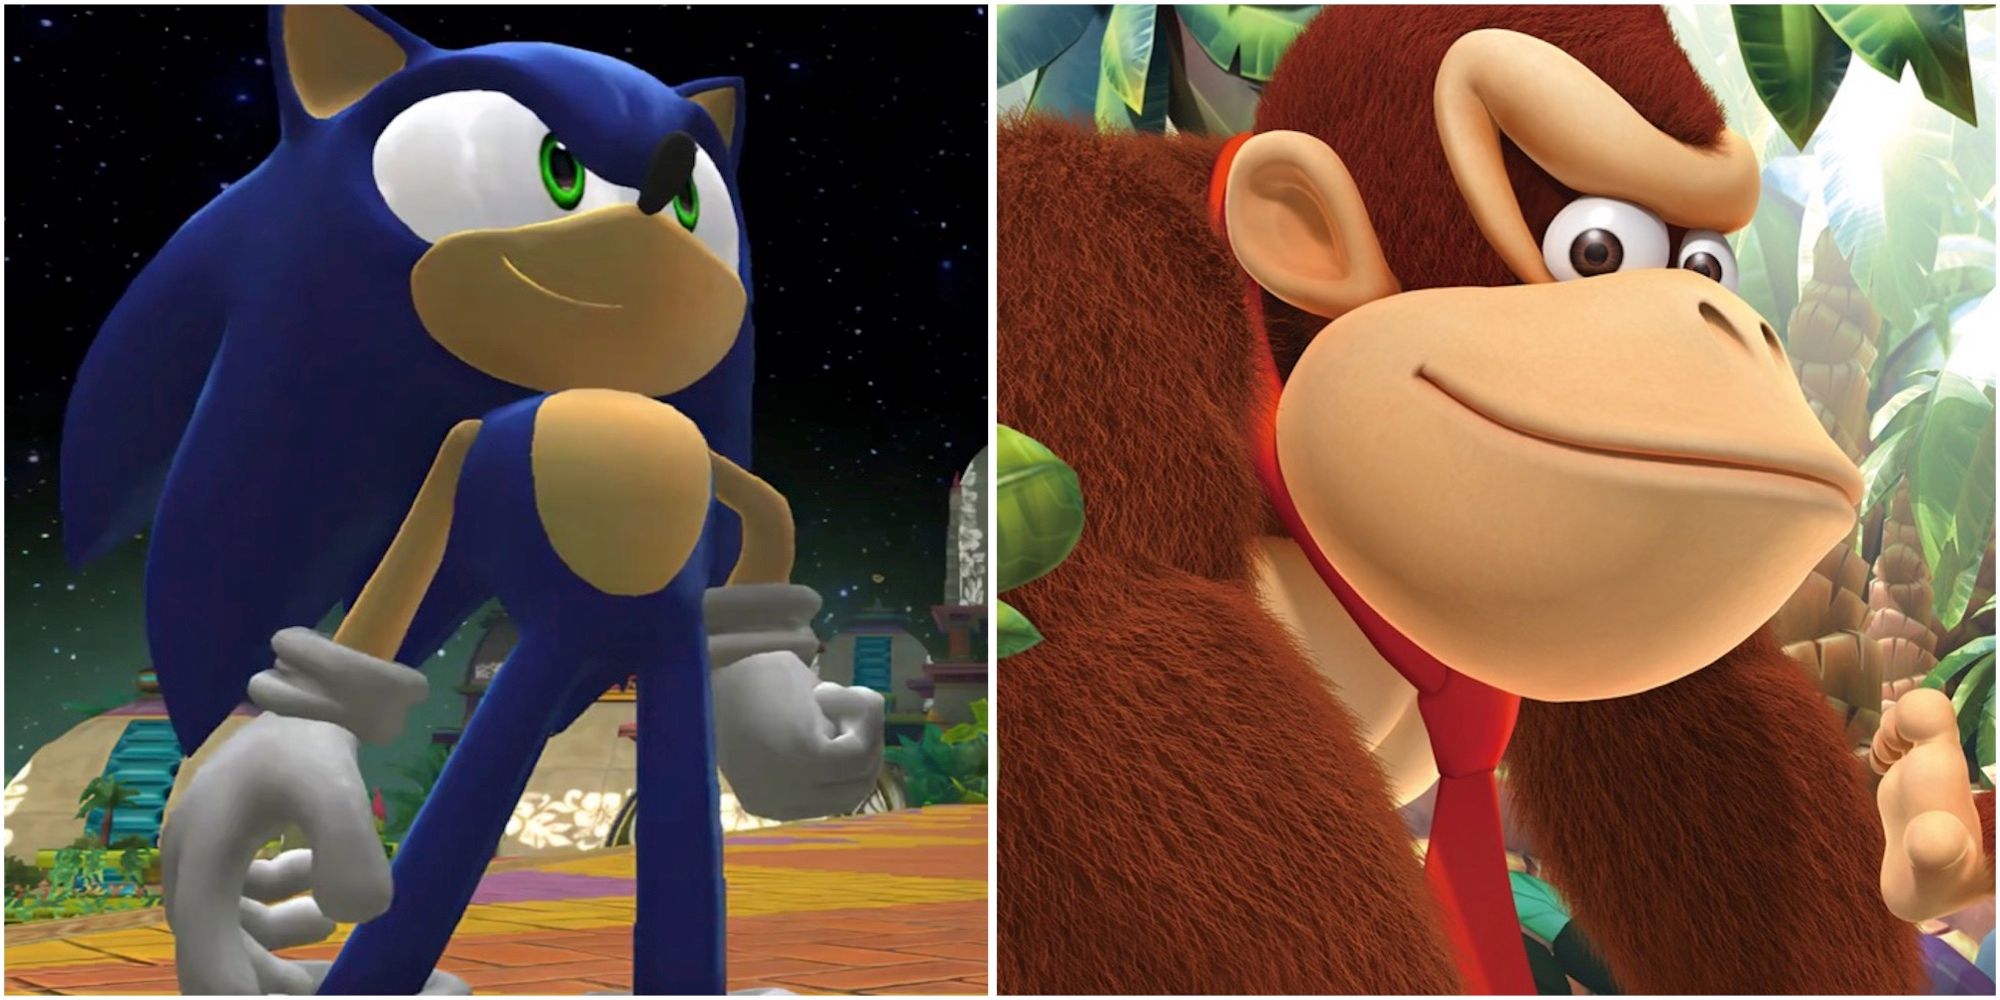 Sonic in Sonic Colors and Donkey Kong in Donkey Kong Country Returns